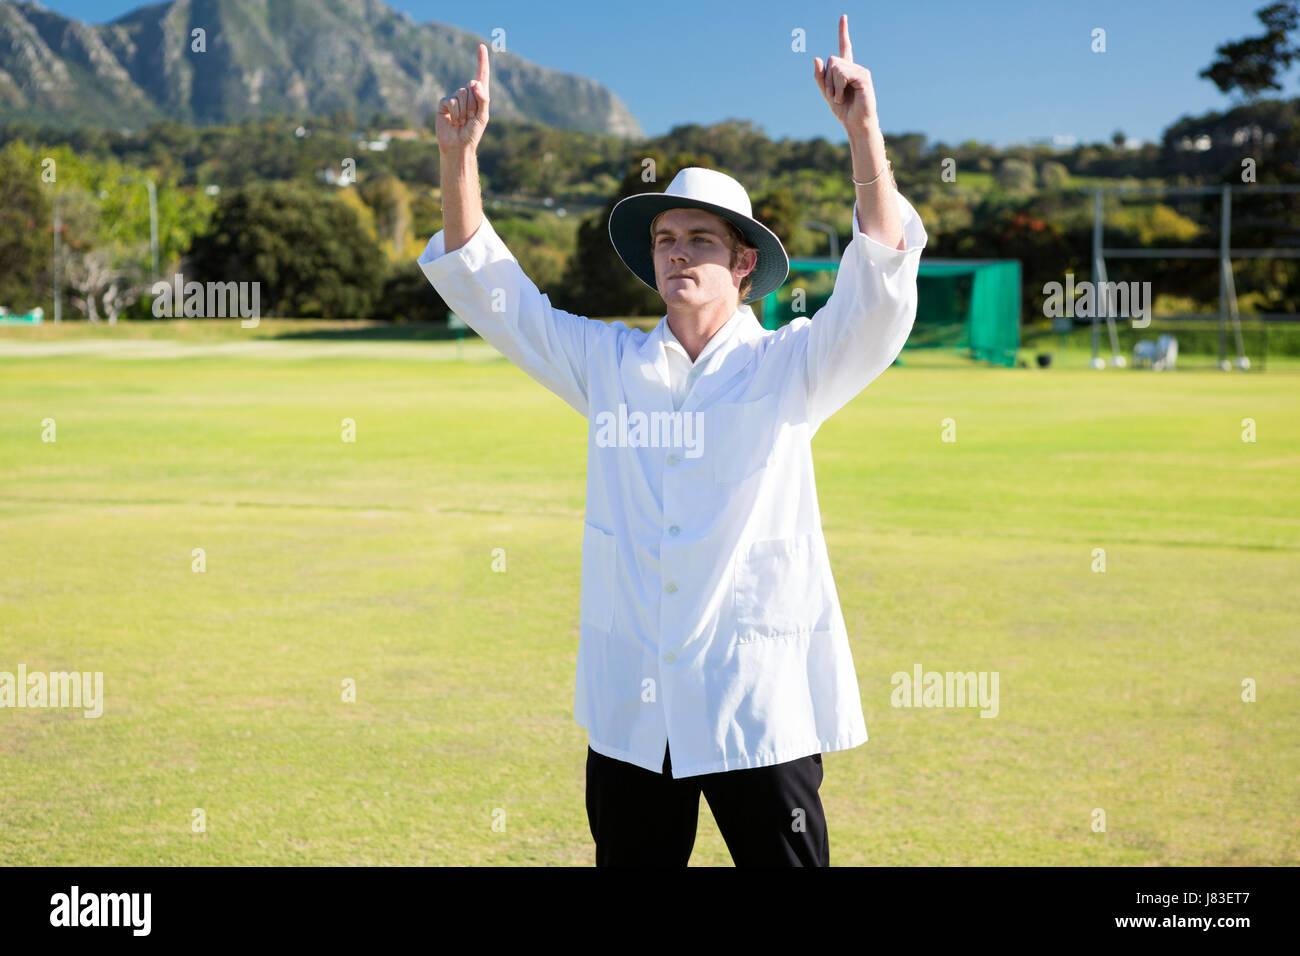 Low angle view of cricket umpire signalling six at match during sunny day Stock Photo